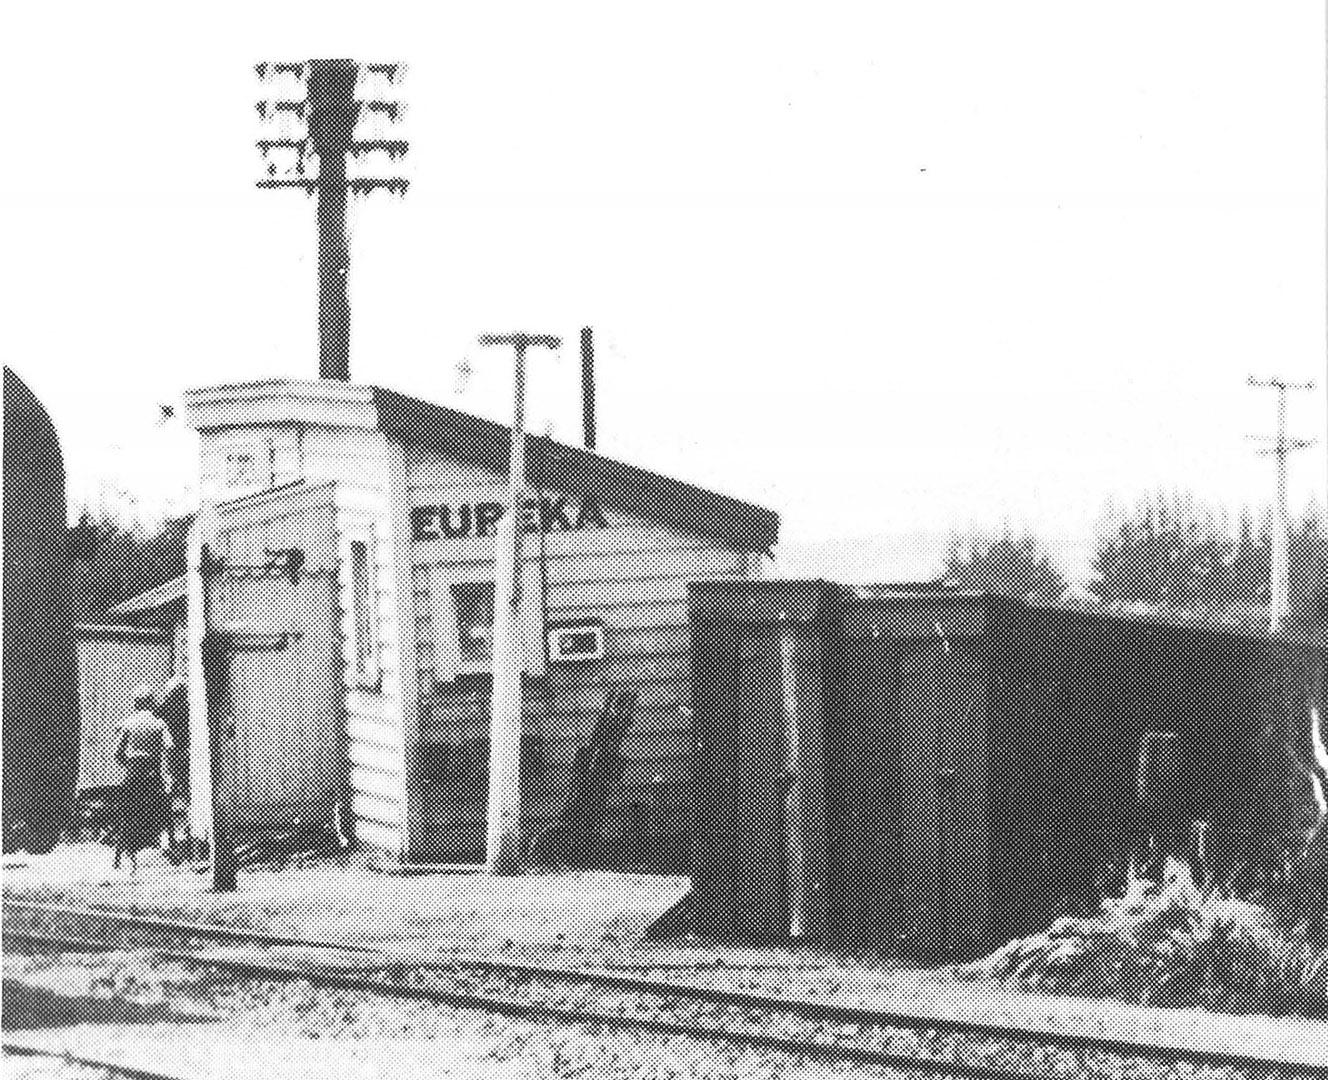 Eureka station as it was in 1956 looking from Hamilton